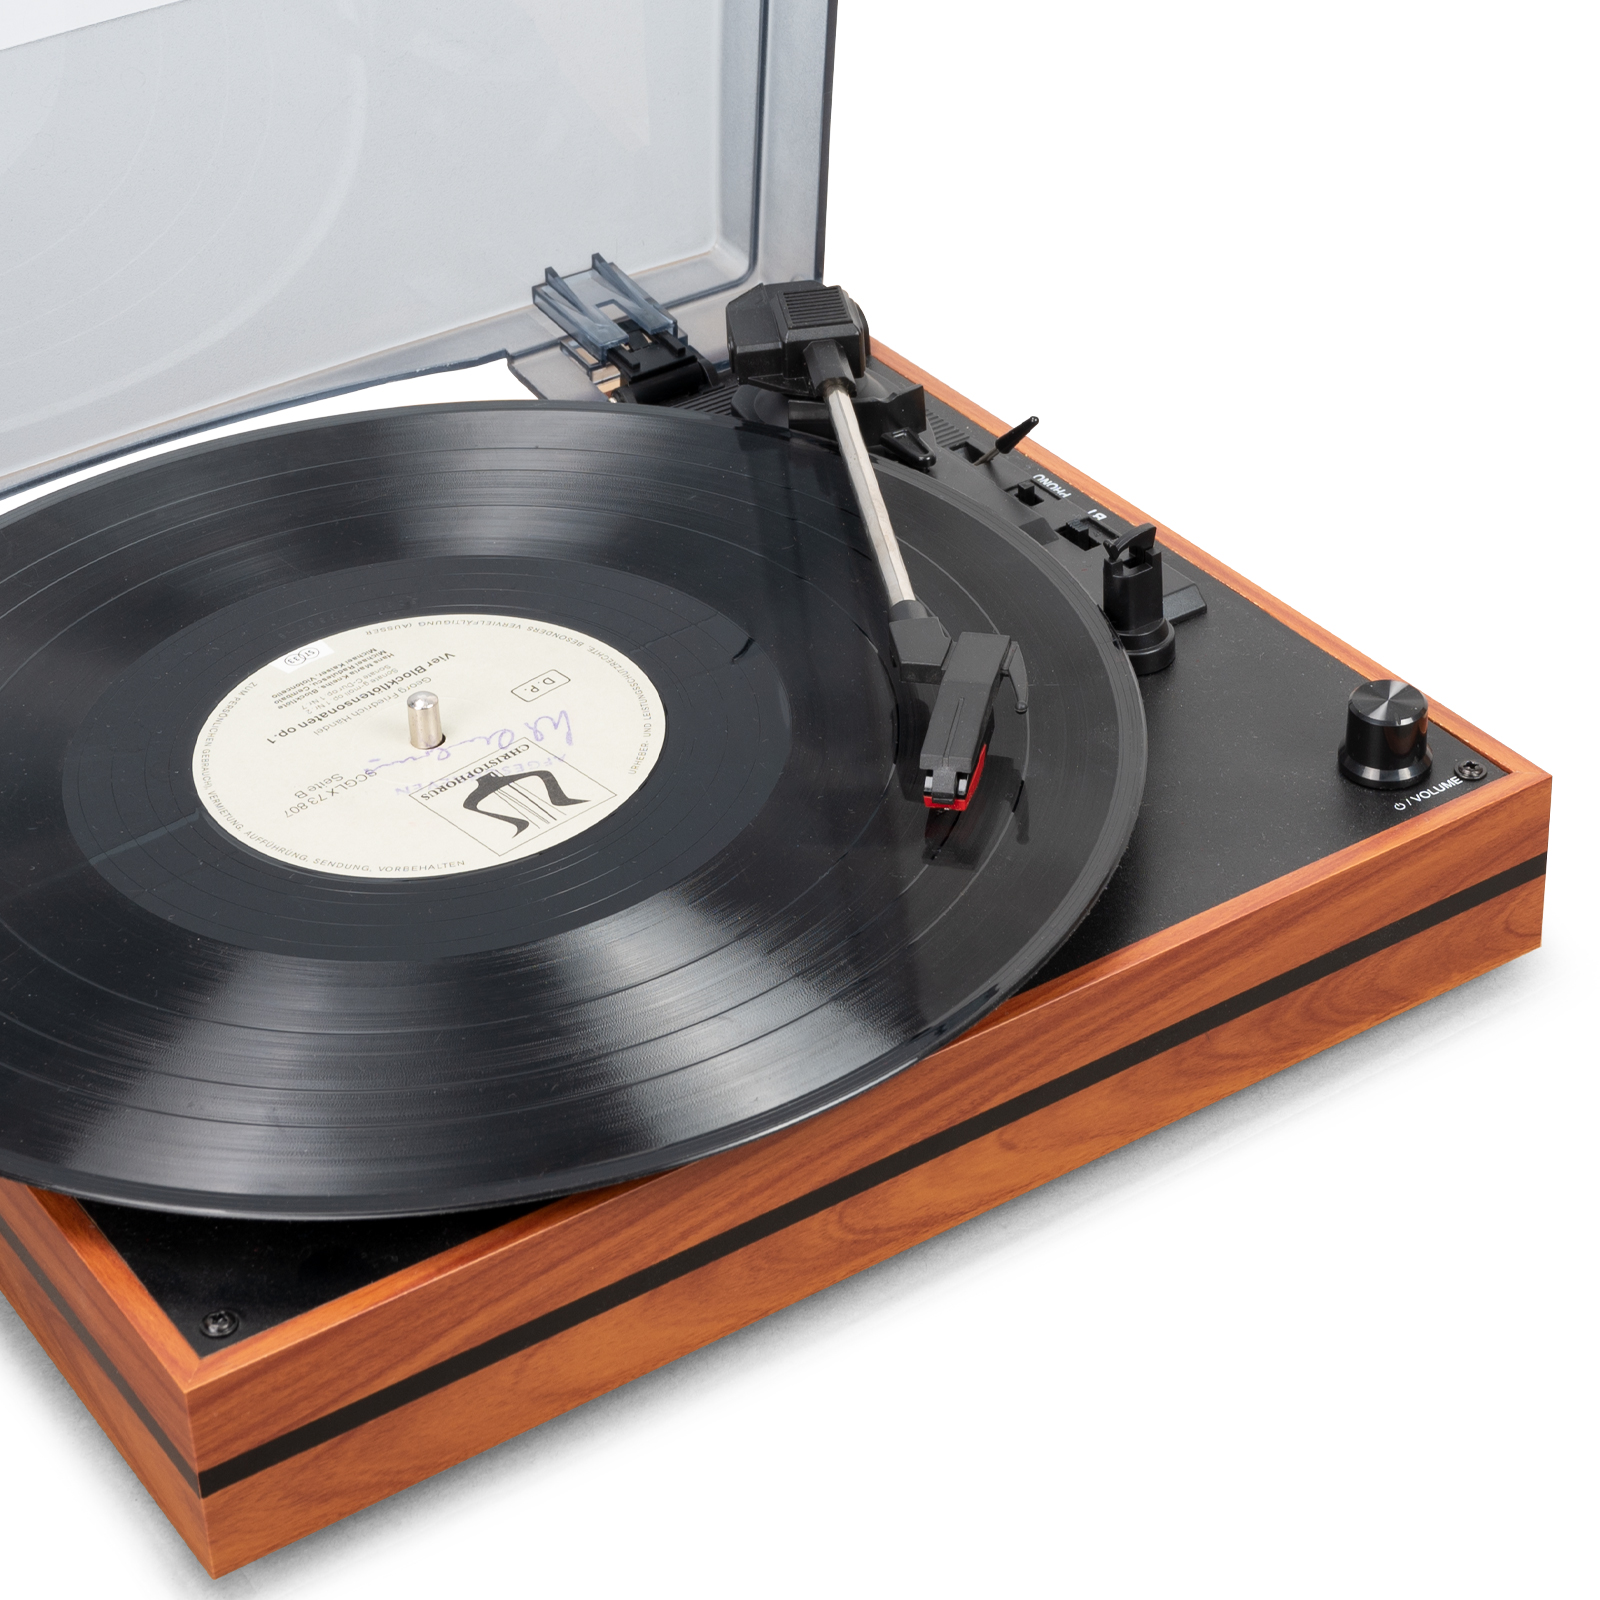 Retro Record Player (for Android) Review